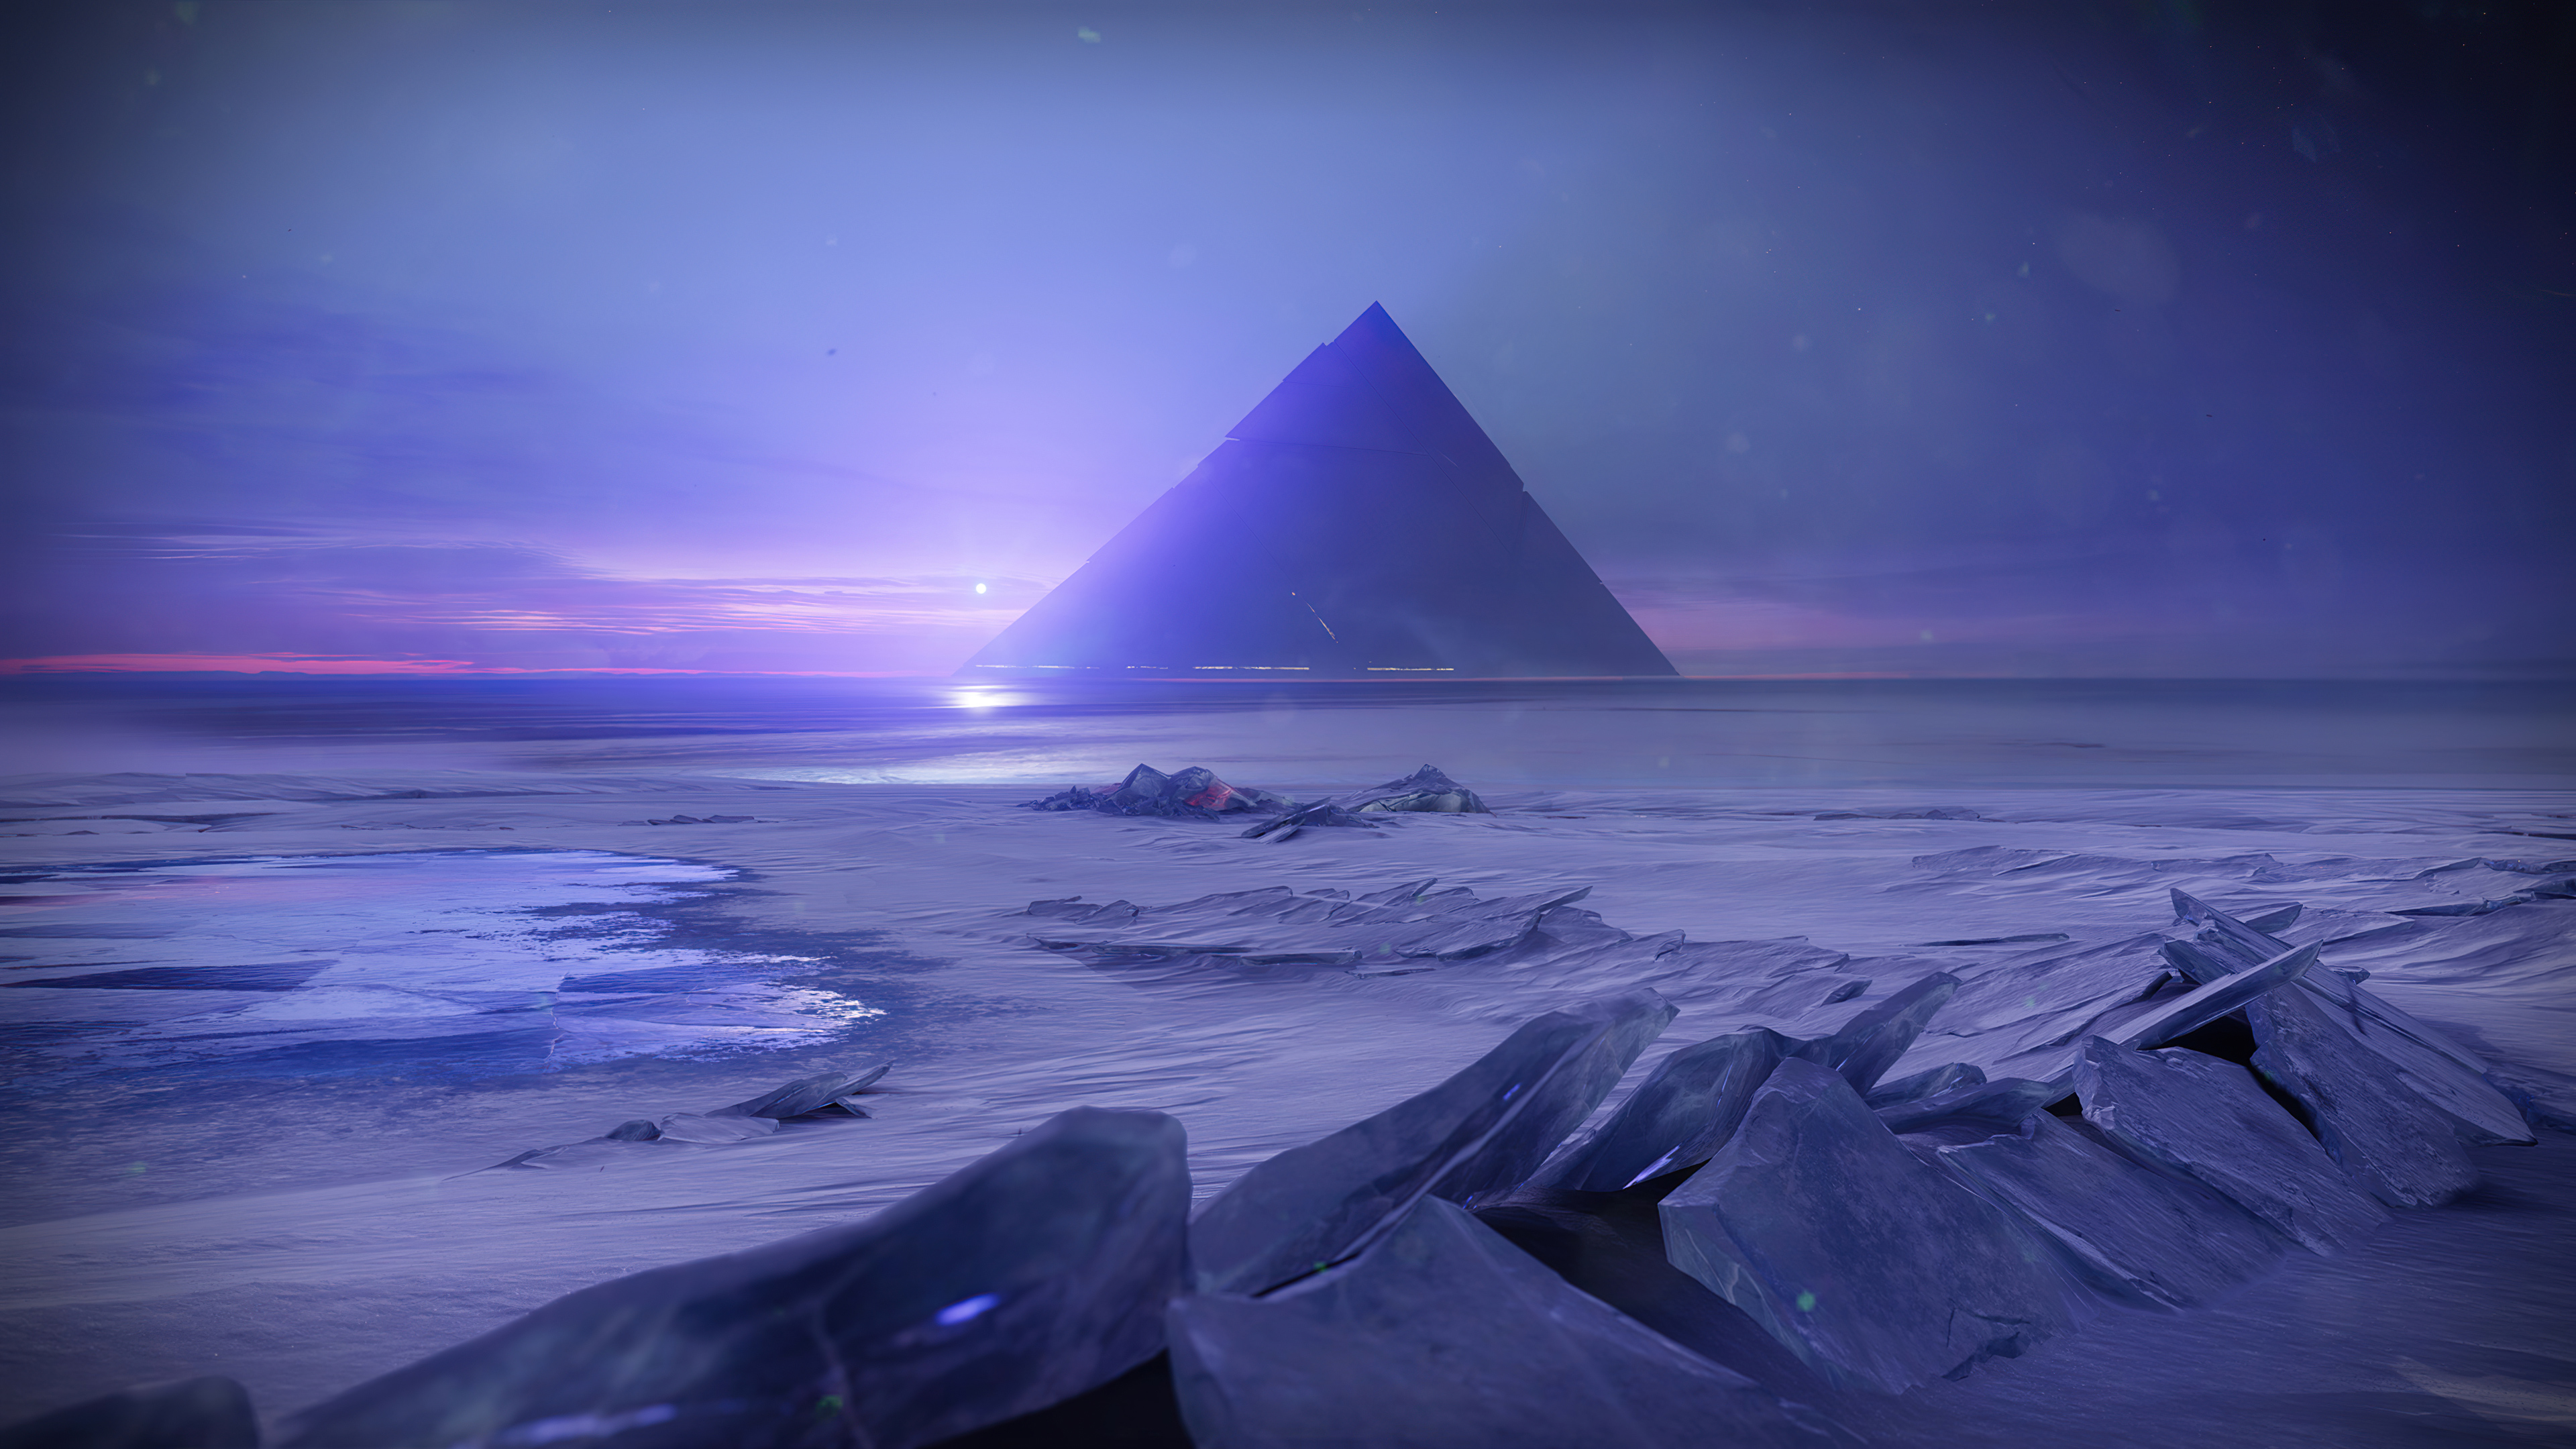 Destiny beyond light europa environment k hd games k wallpapers images backgrounds photos and pictures